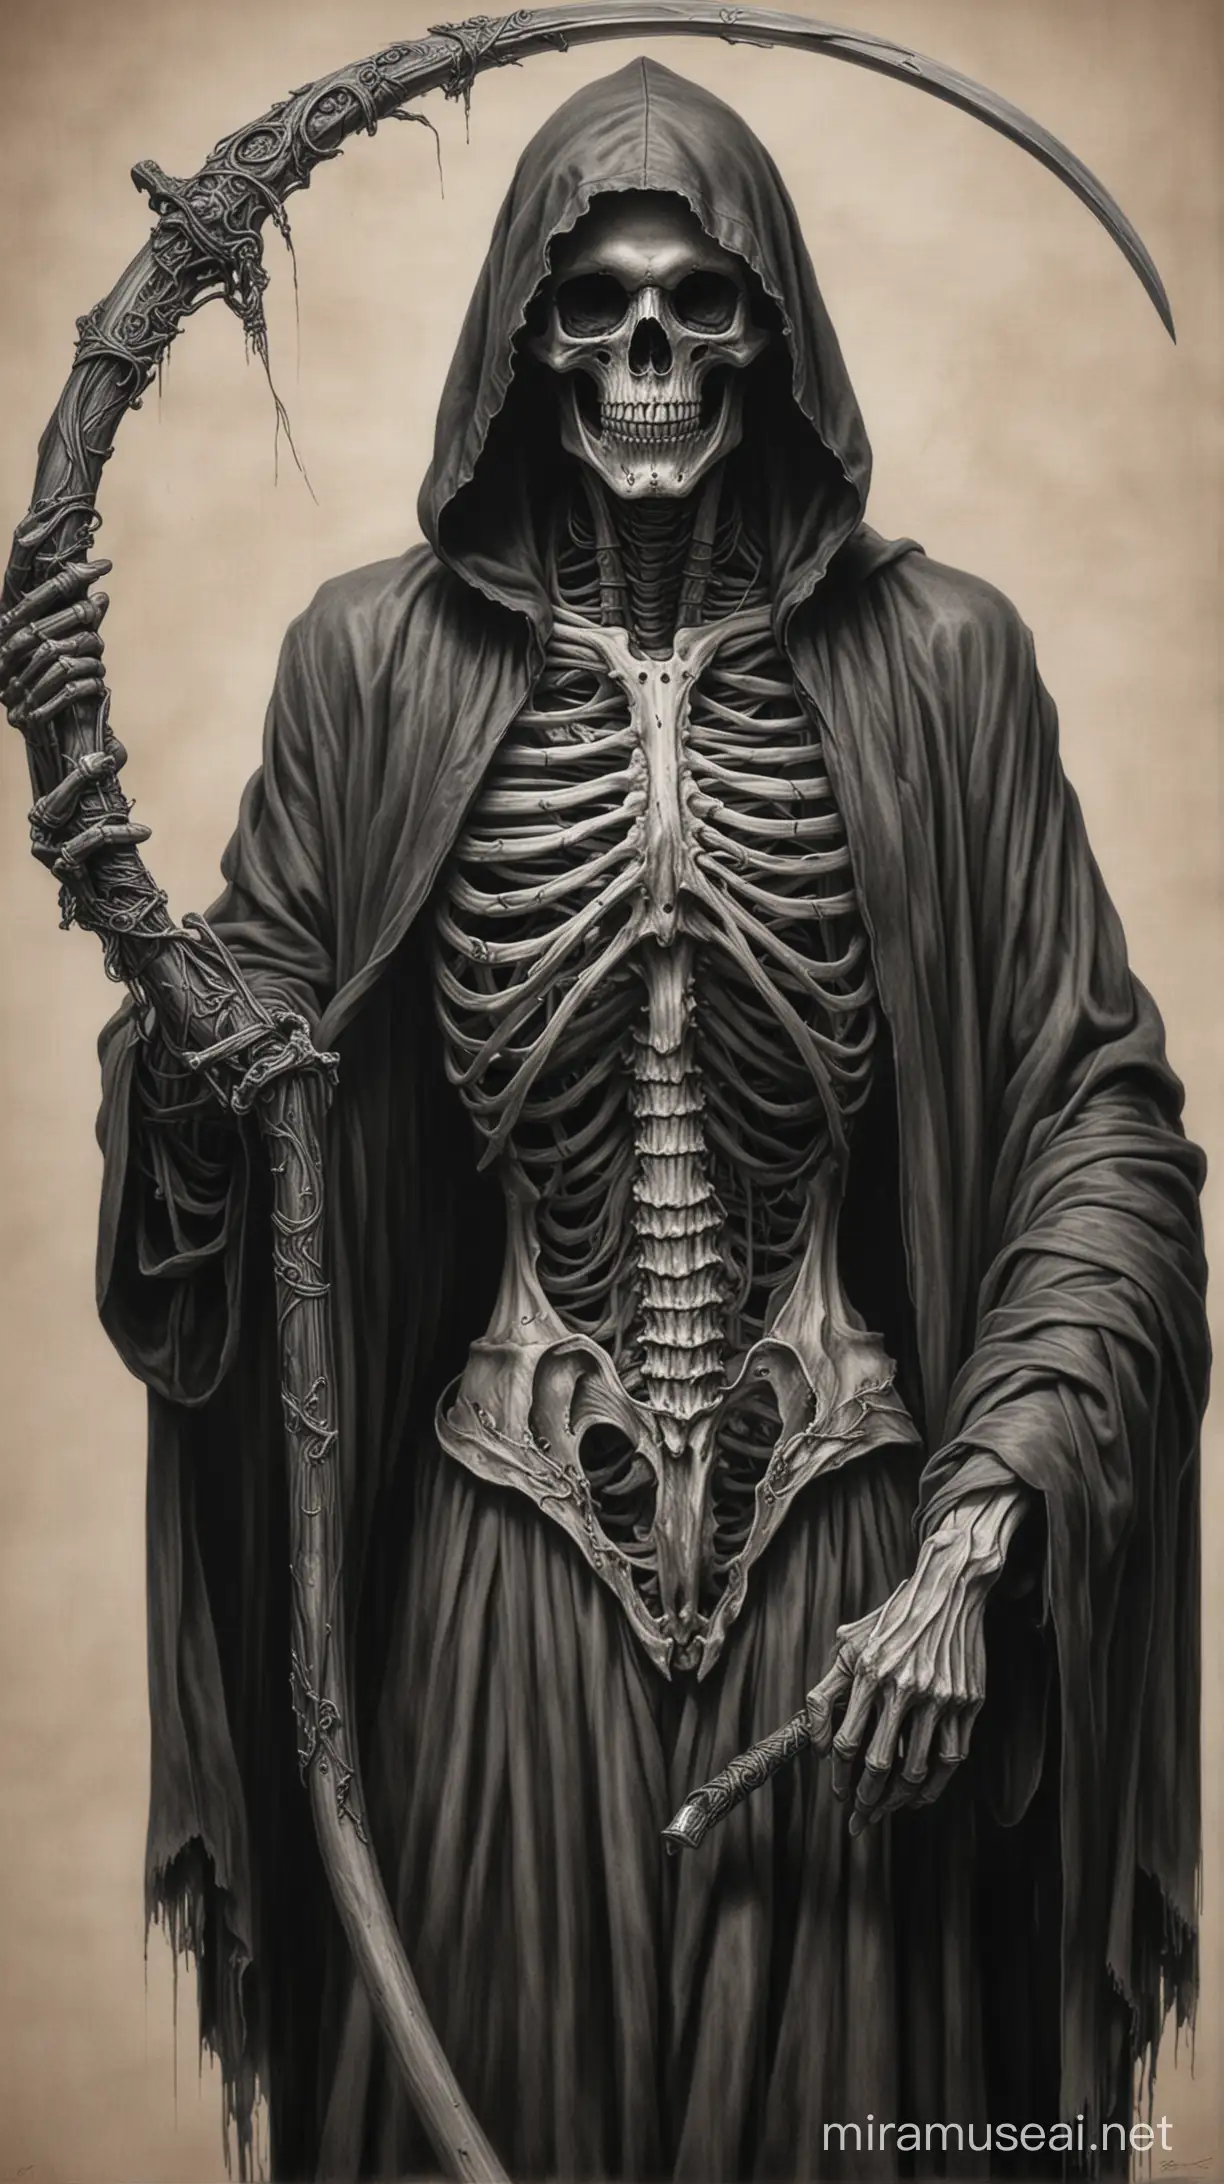 Black and grey realism drawing of Grim reaper holding a scythe with a robe and exposed skeleton ribcage